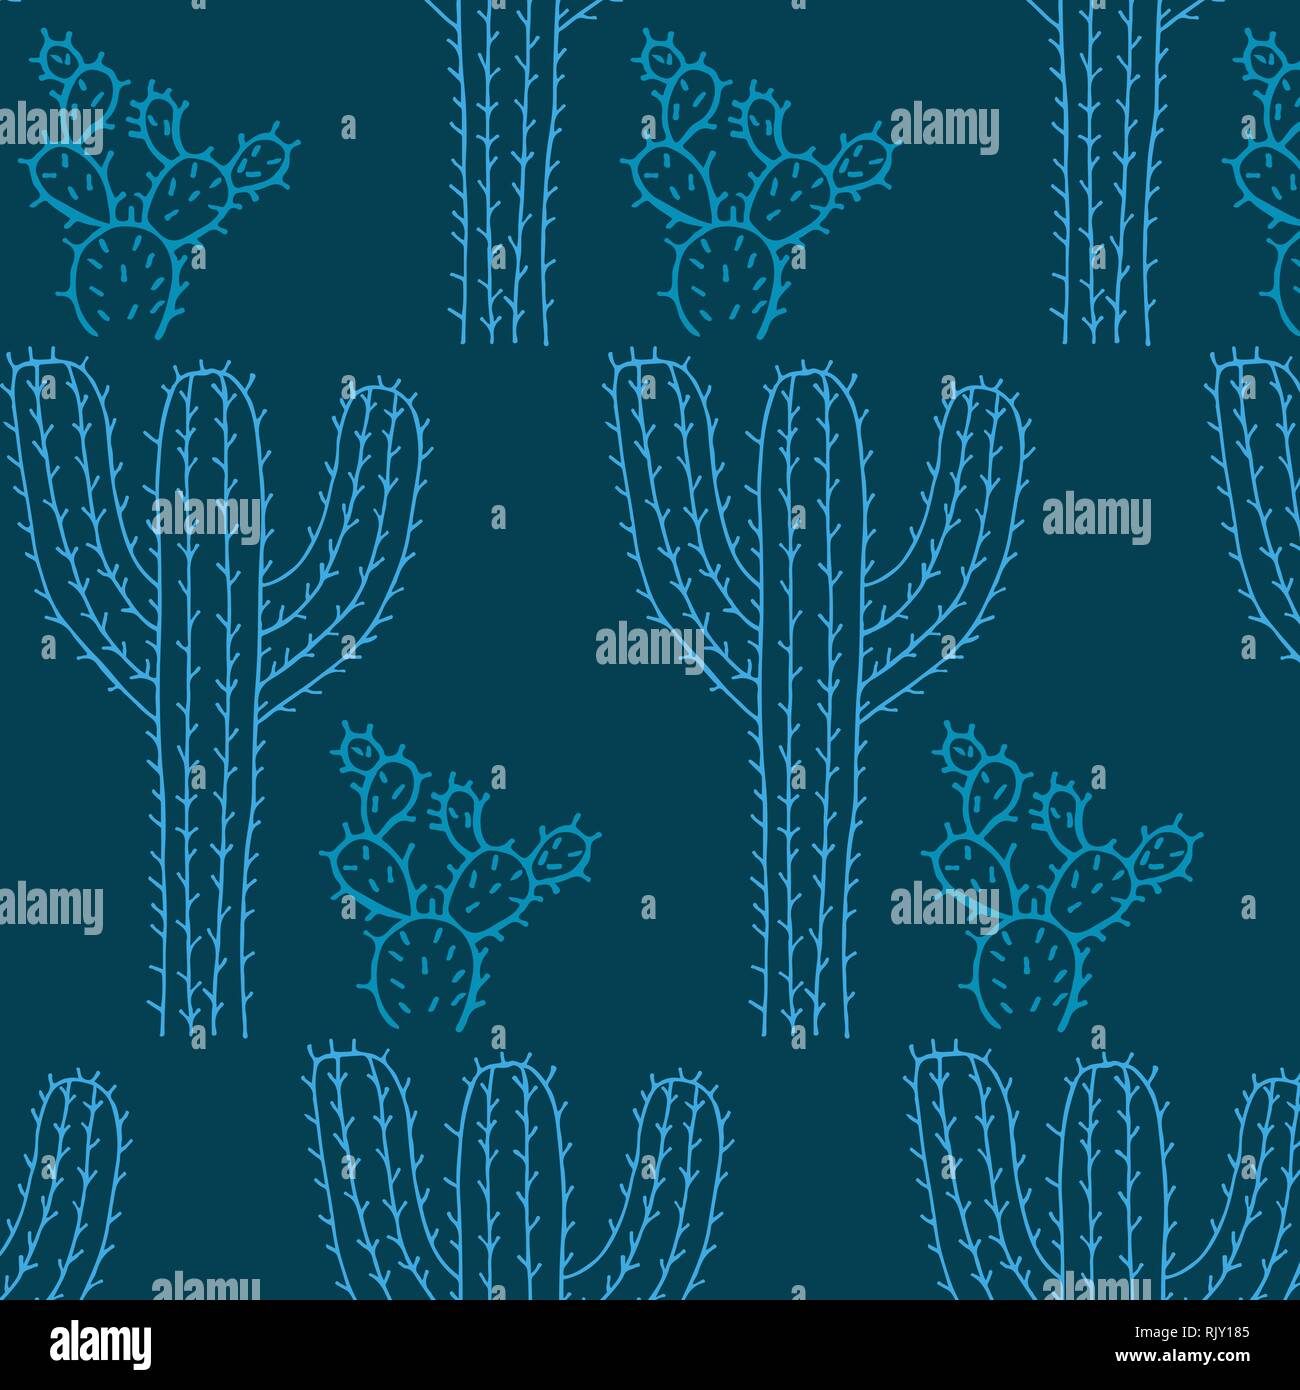 Cactus vector pattern in a blue color palette Stock Vector